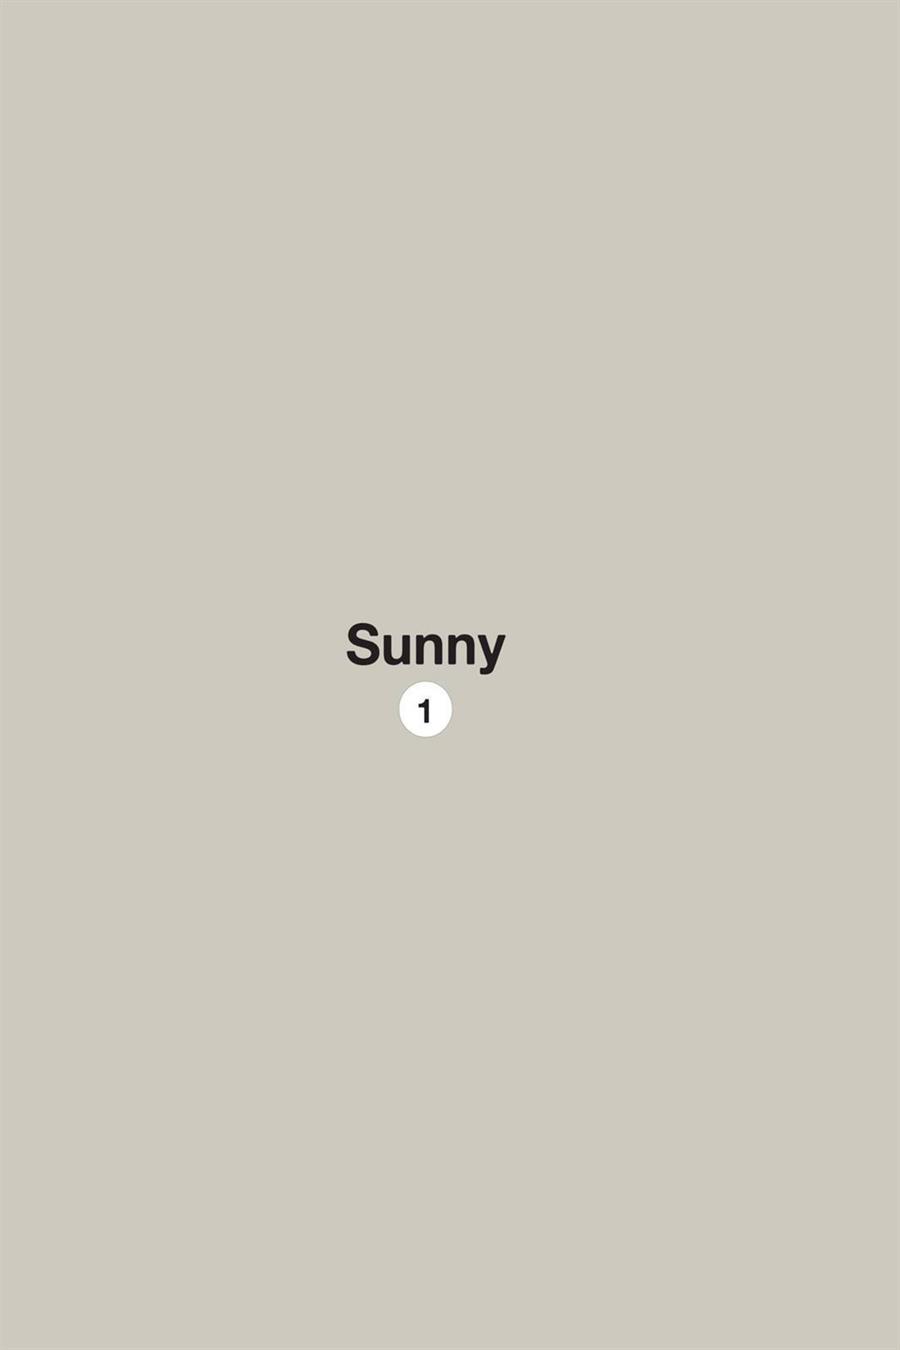 Sunny Chapter 1